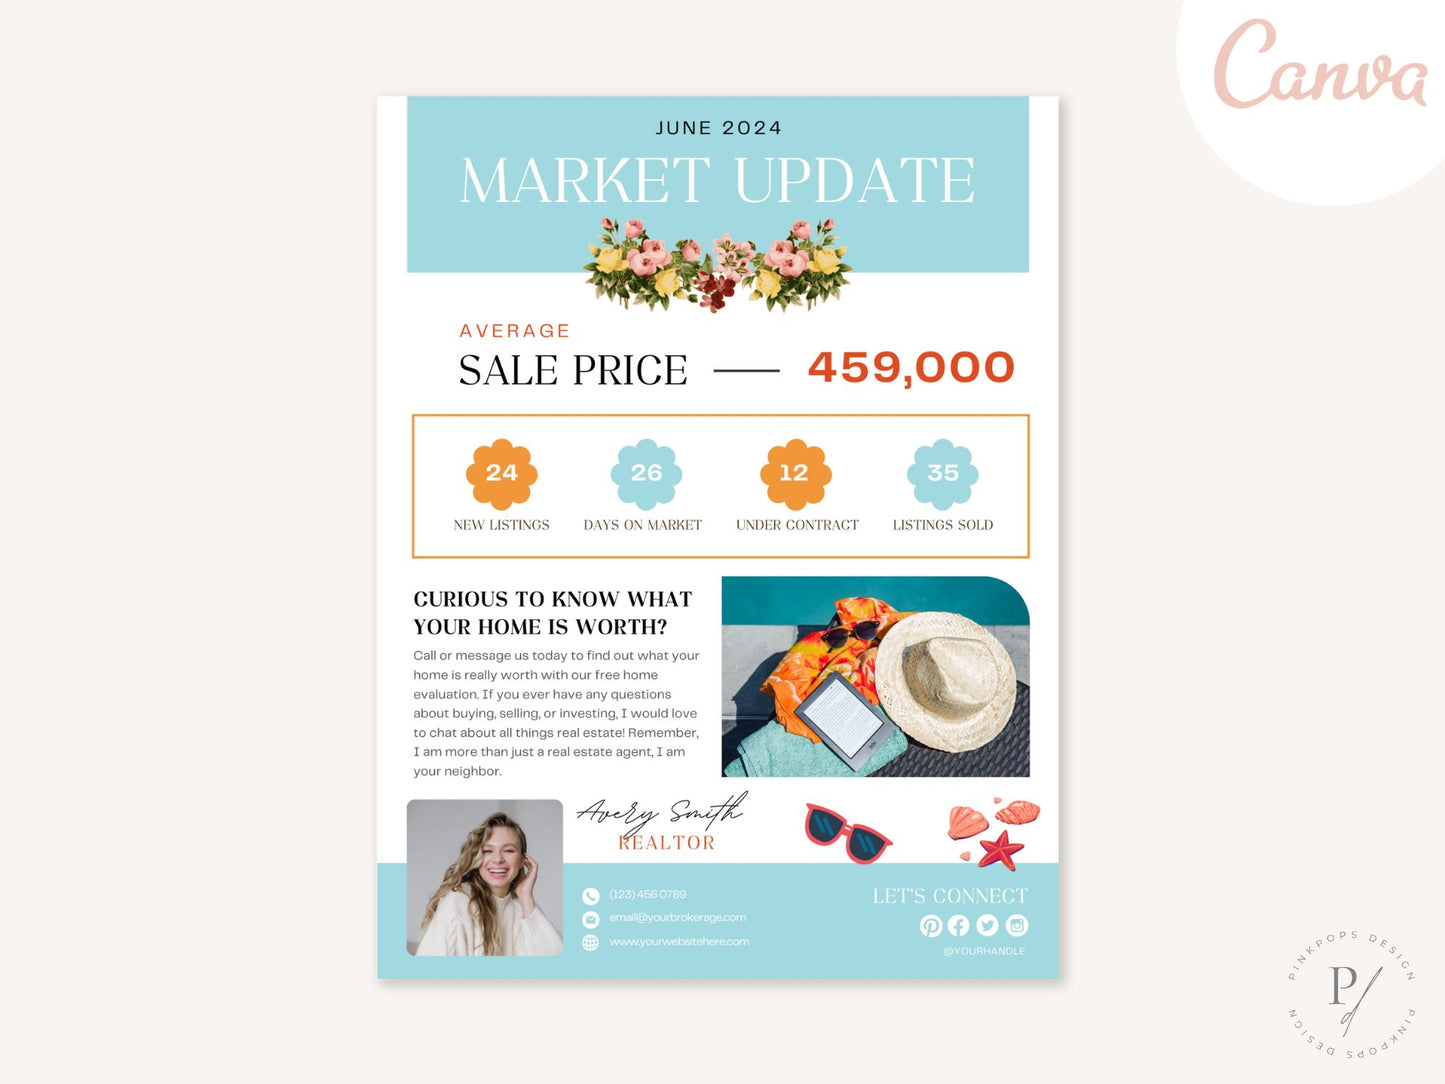 Summer Market Update Flyer - Stay informed with valuable insights into the summer real estate market.